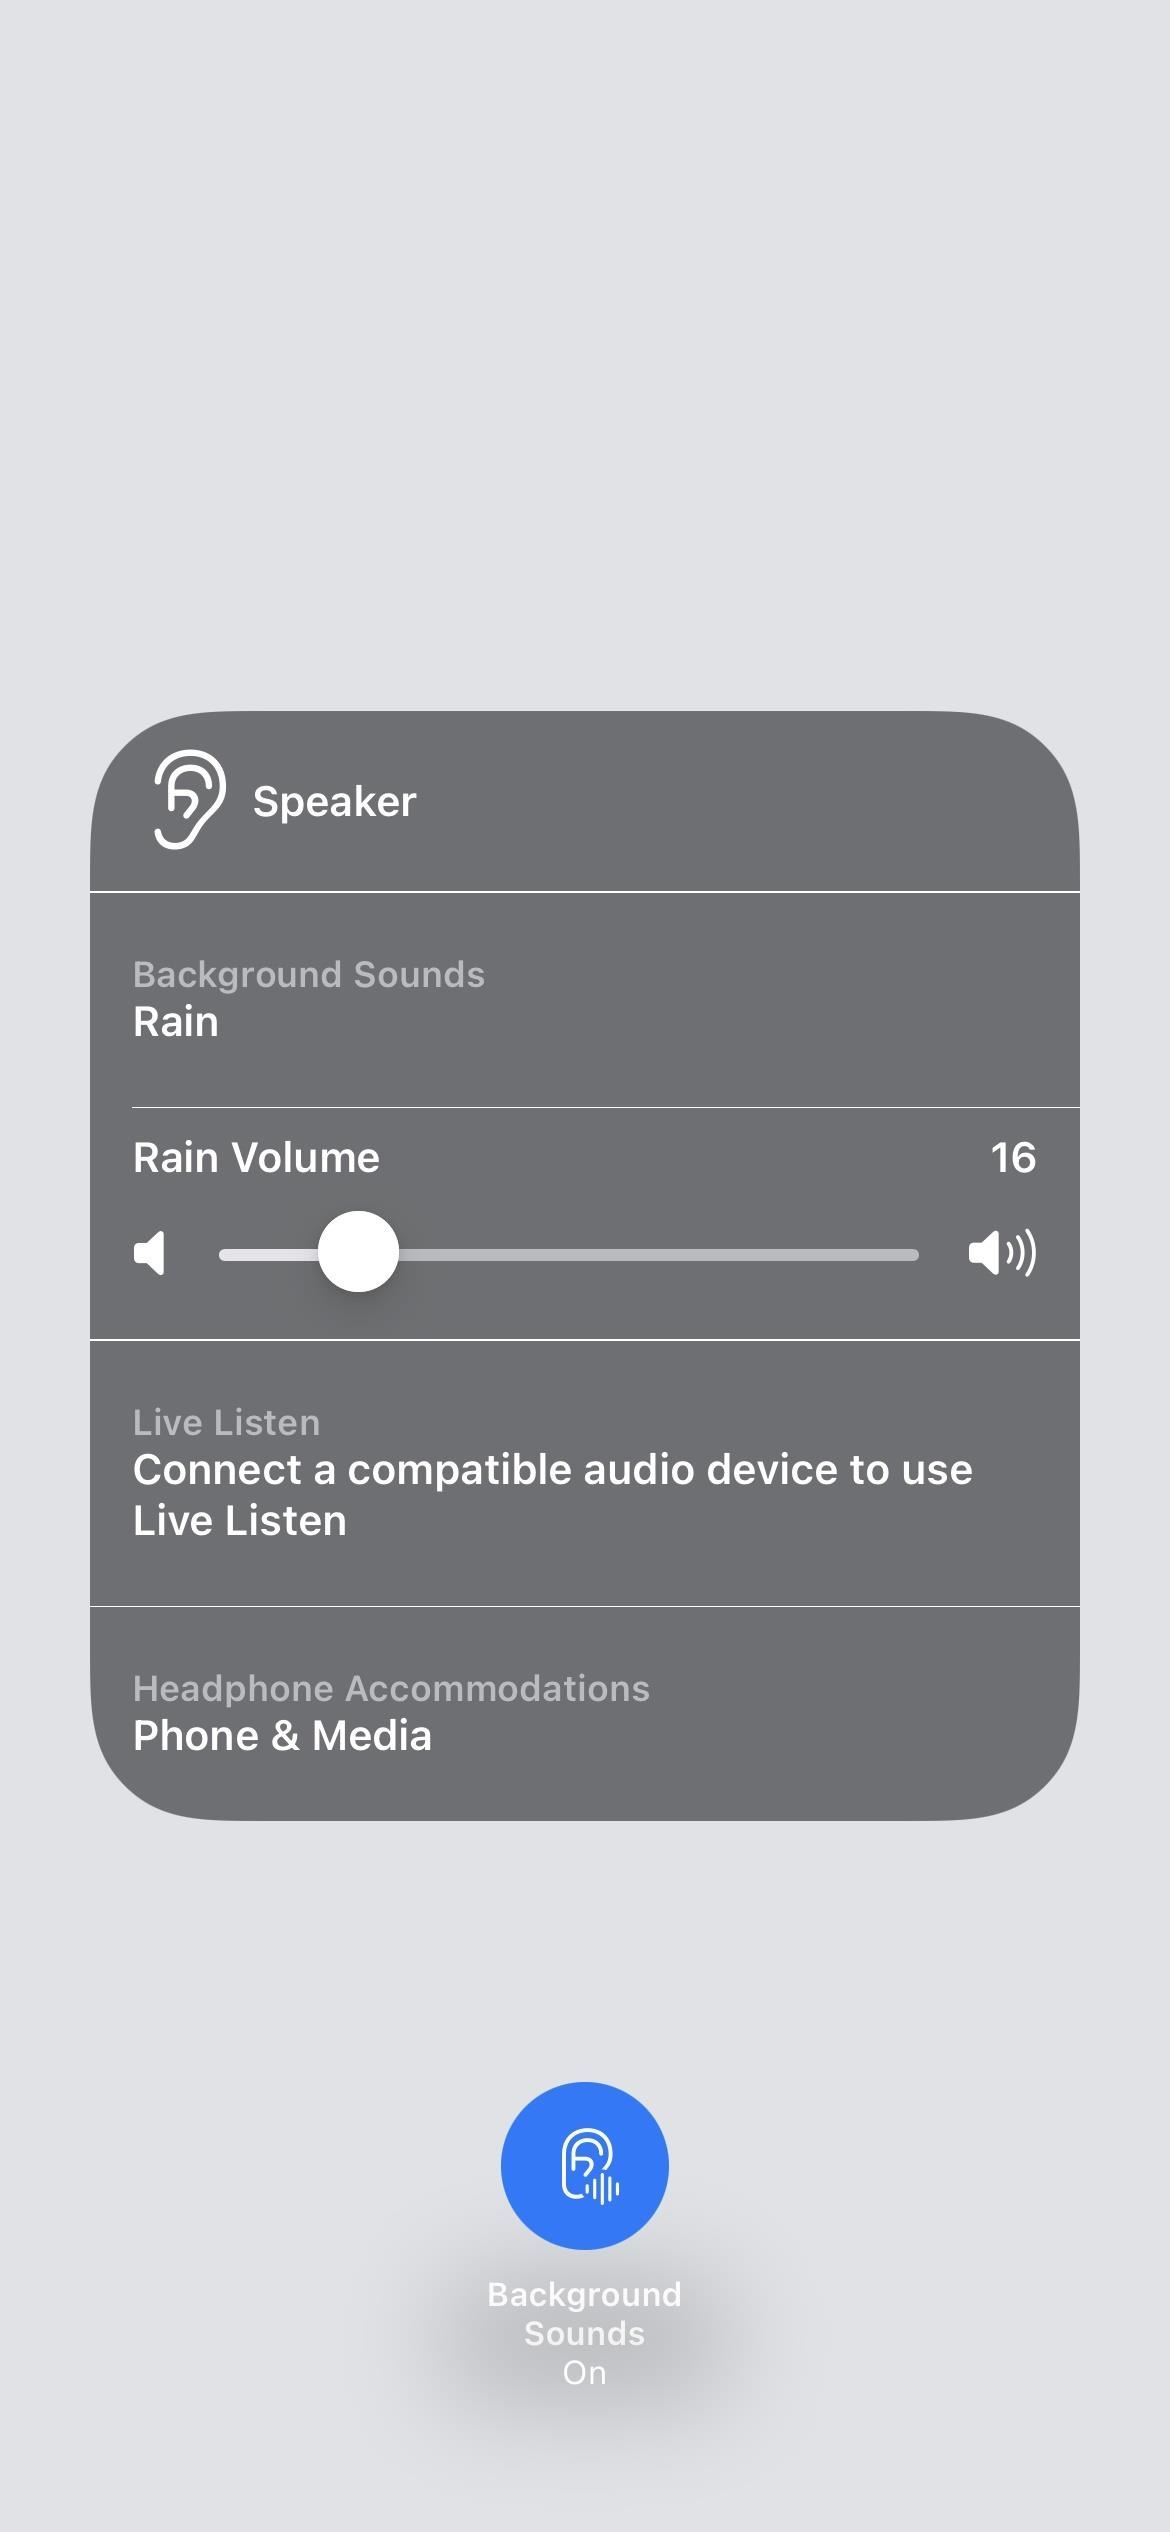 Turn Your iPhone into a Personal Sound Machine to Help You Focus, Rest, and Stay Calm